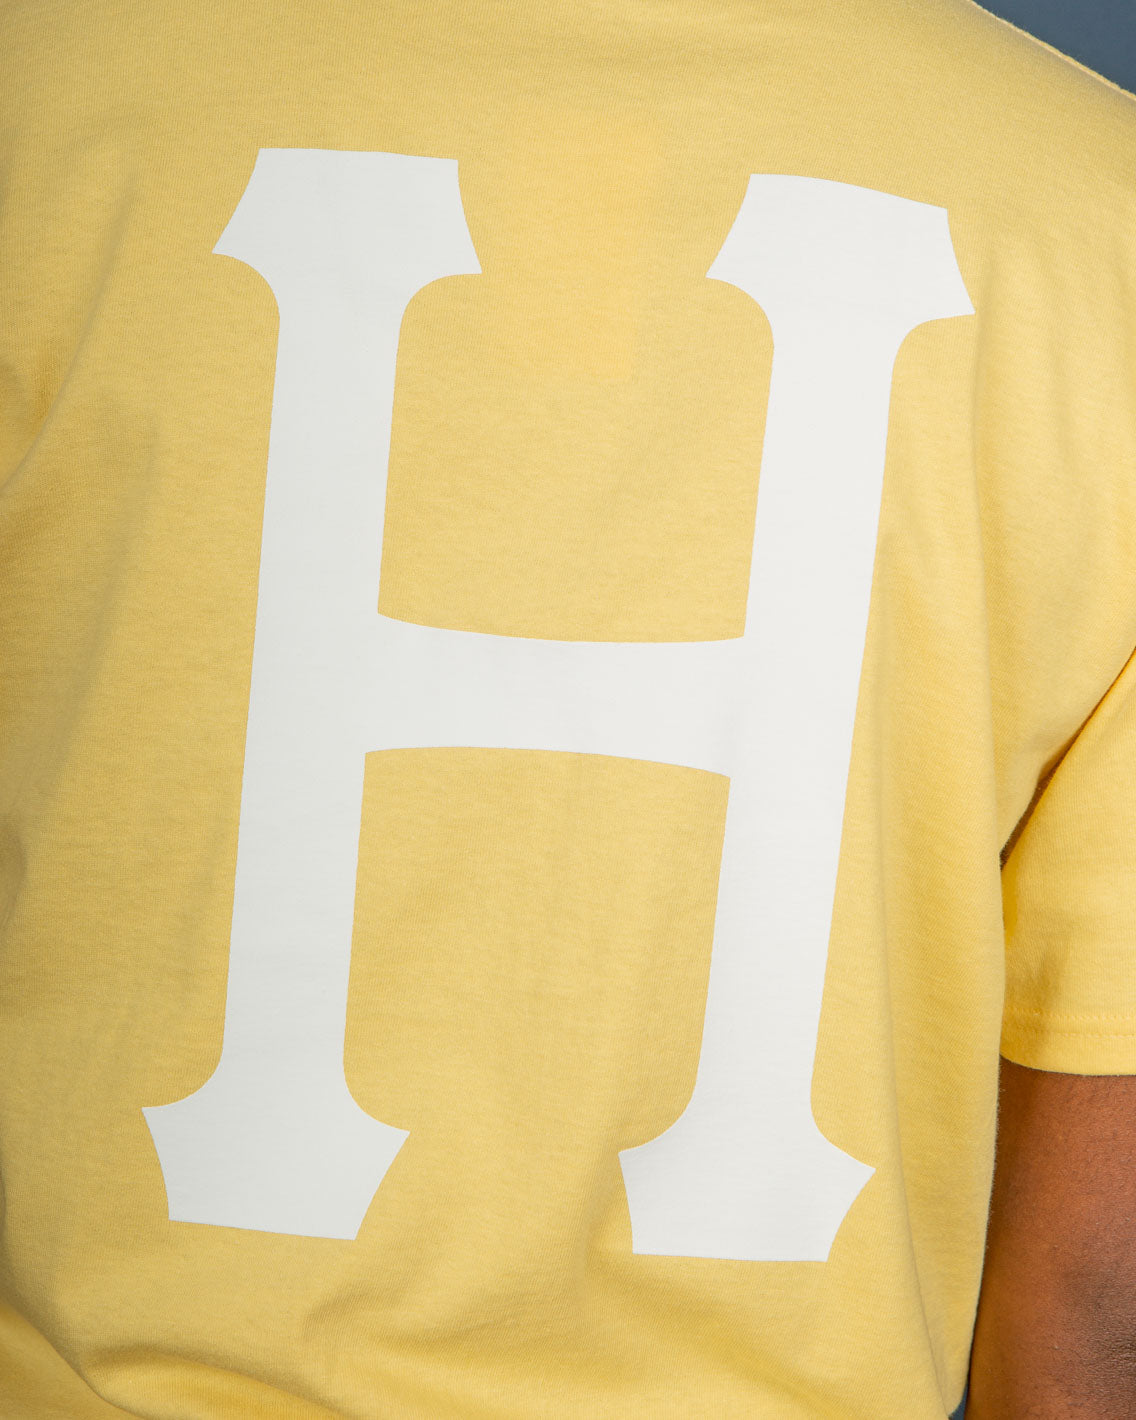 HUF - Essentials Classic H Tee - Washed Yellow